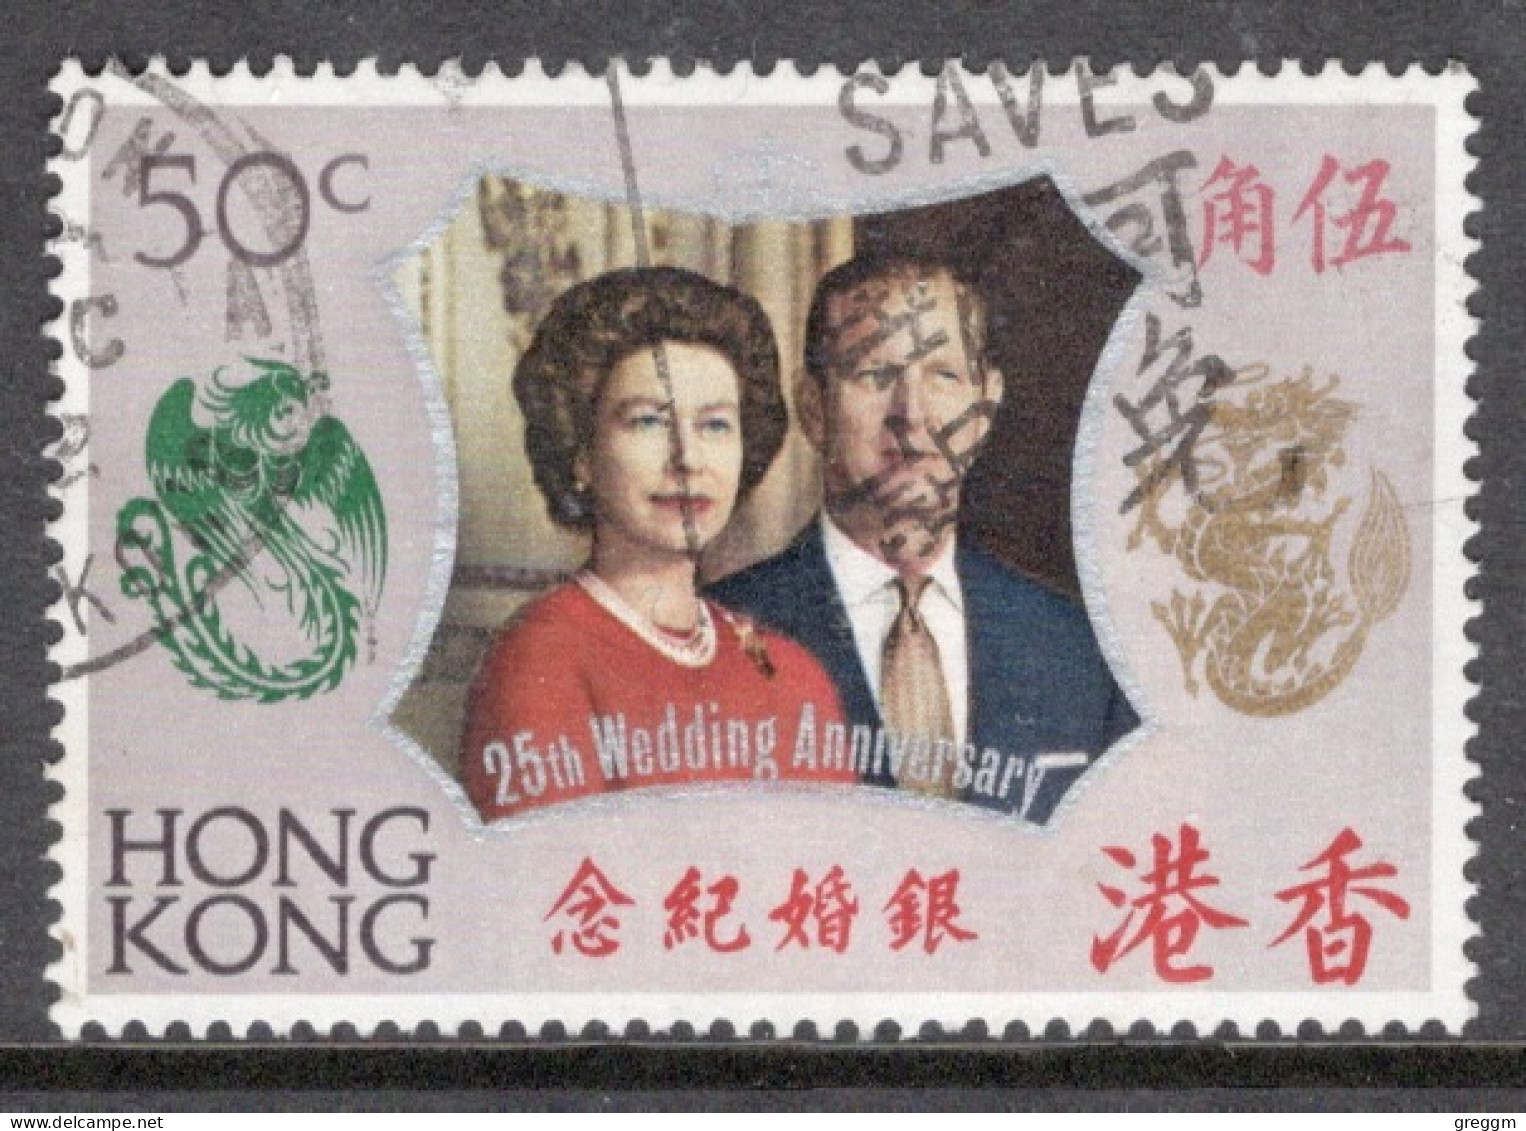 Hong Kong 1972 A Single Stamp To Celebrate The 25th Anniversary Of The Wedding Of Queen And Prince Philip In Fine Used. - Oblitérés